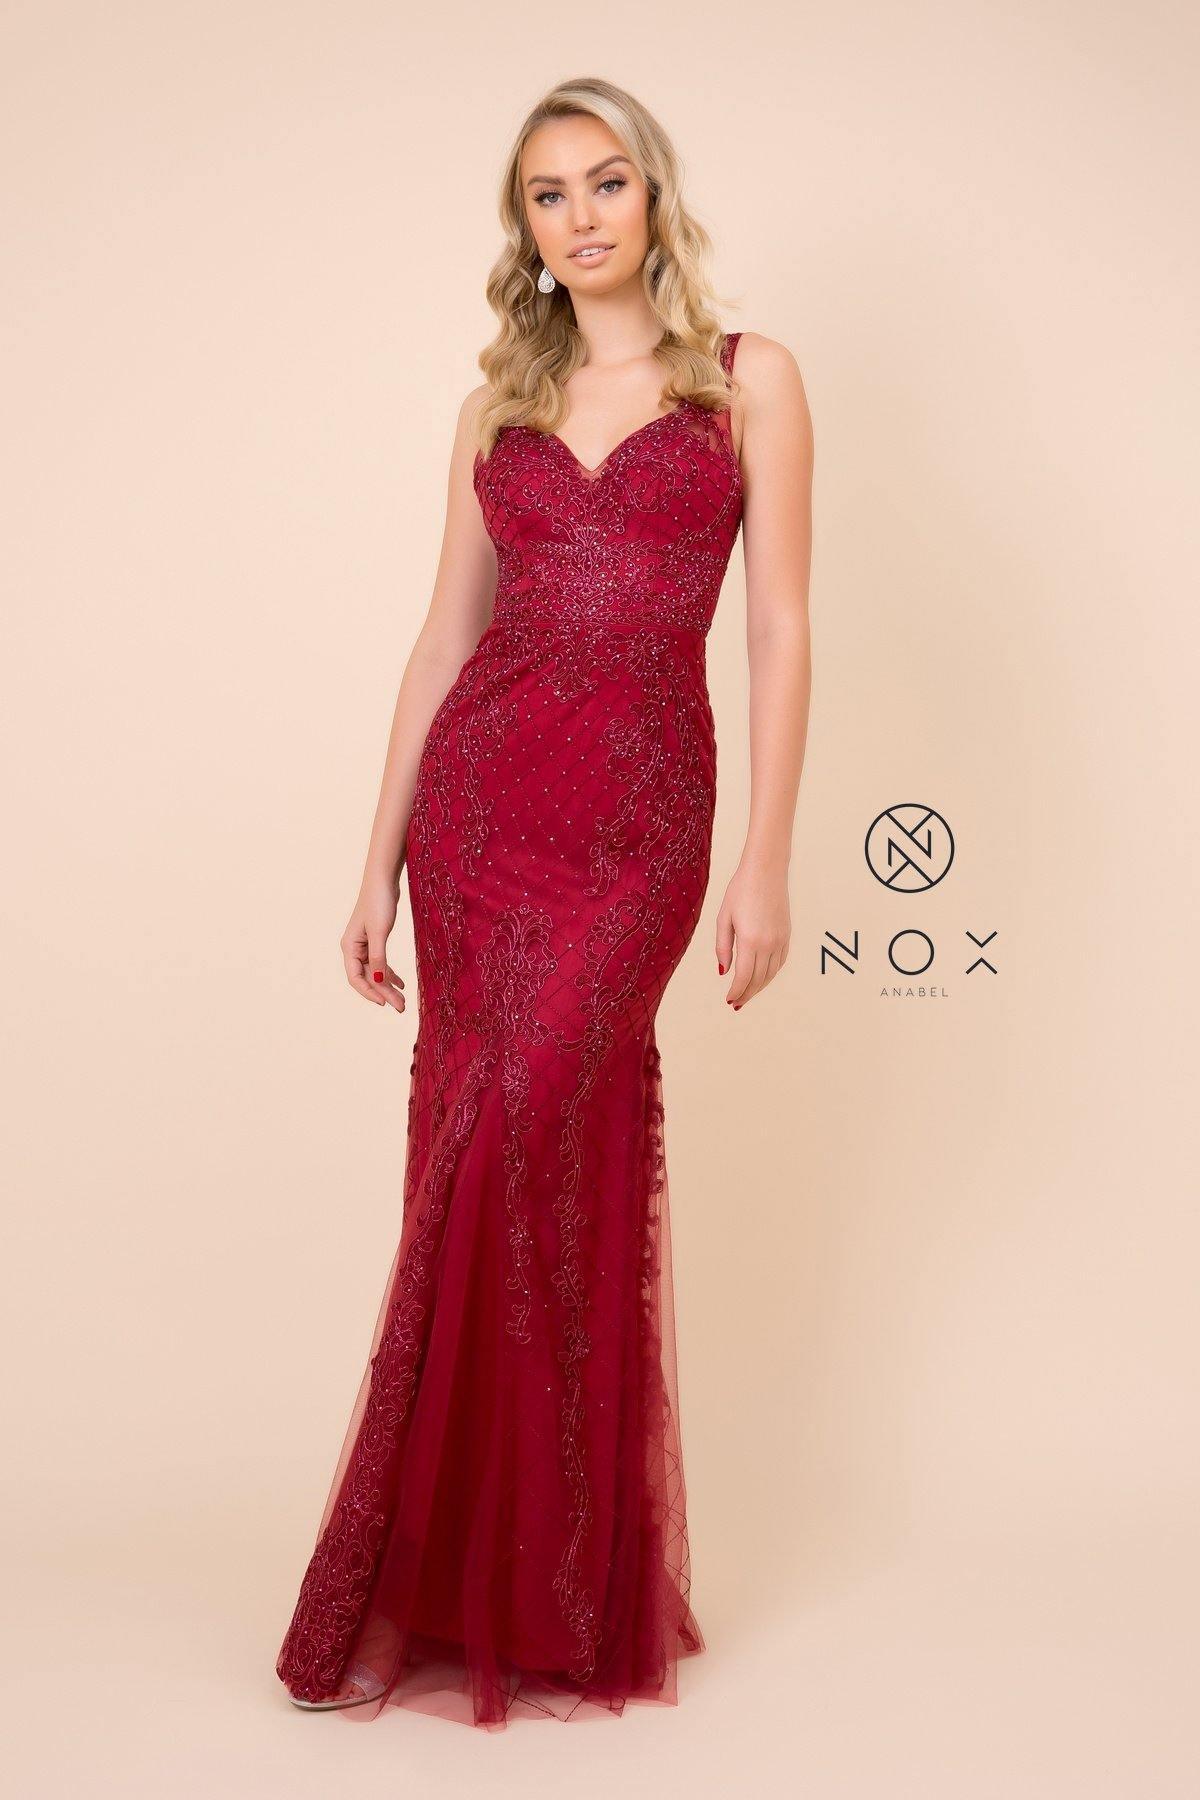 Long Formal Sleeveless Mermaid Prom Dress Sale - The Dress Outlet